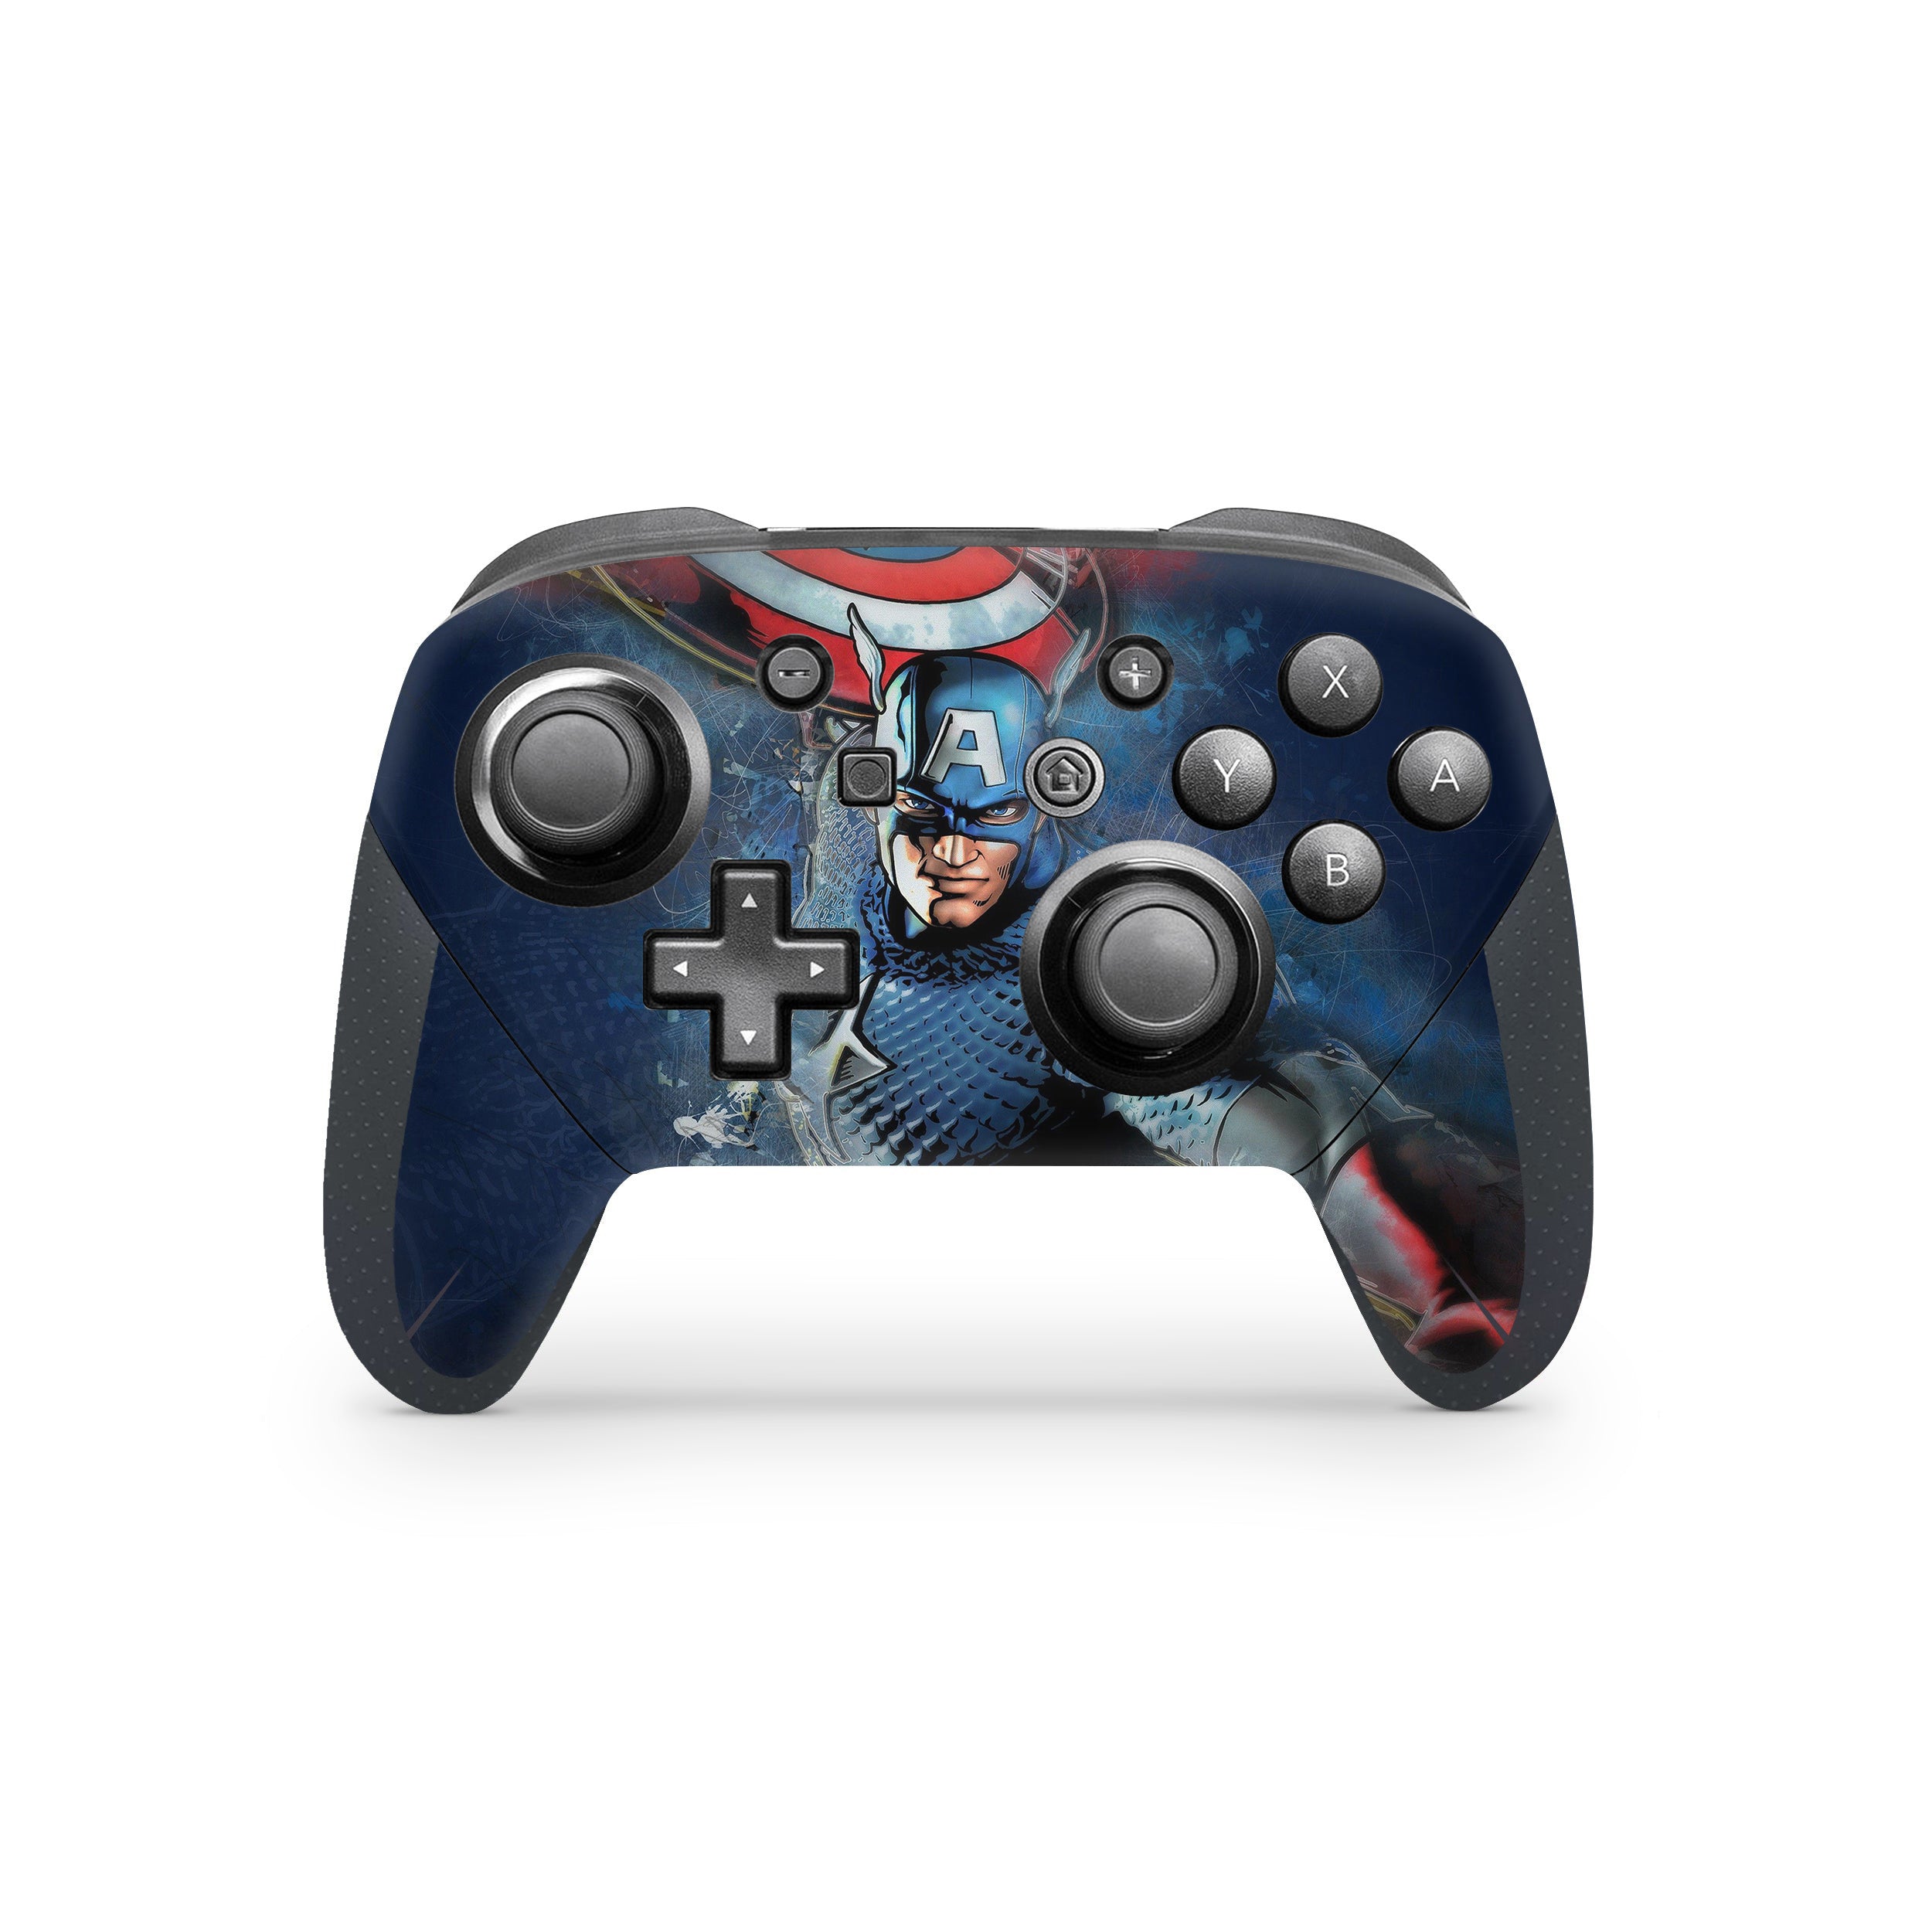 A video game skin featuring a Marvel Comics Captain America design for the Switch Pro Controller.